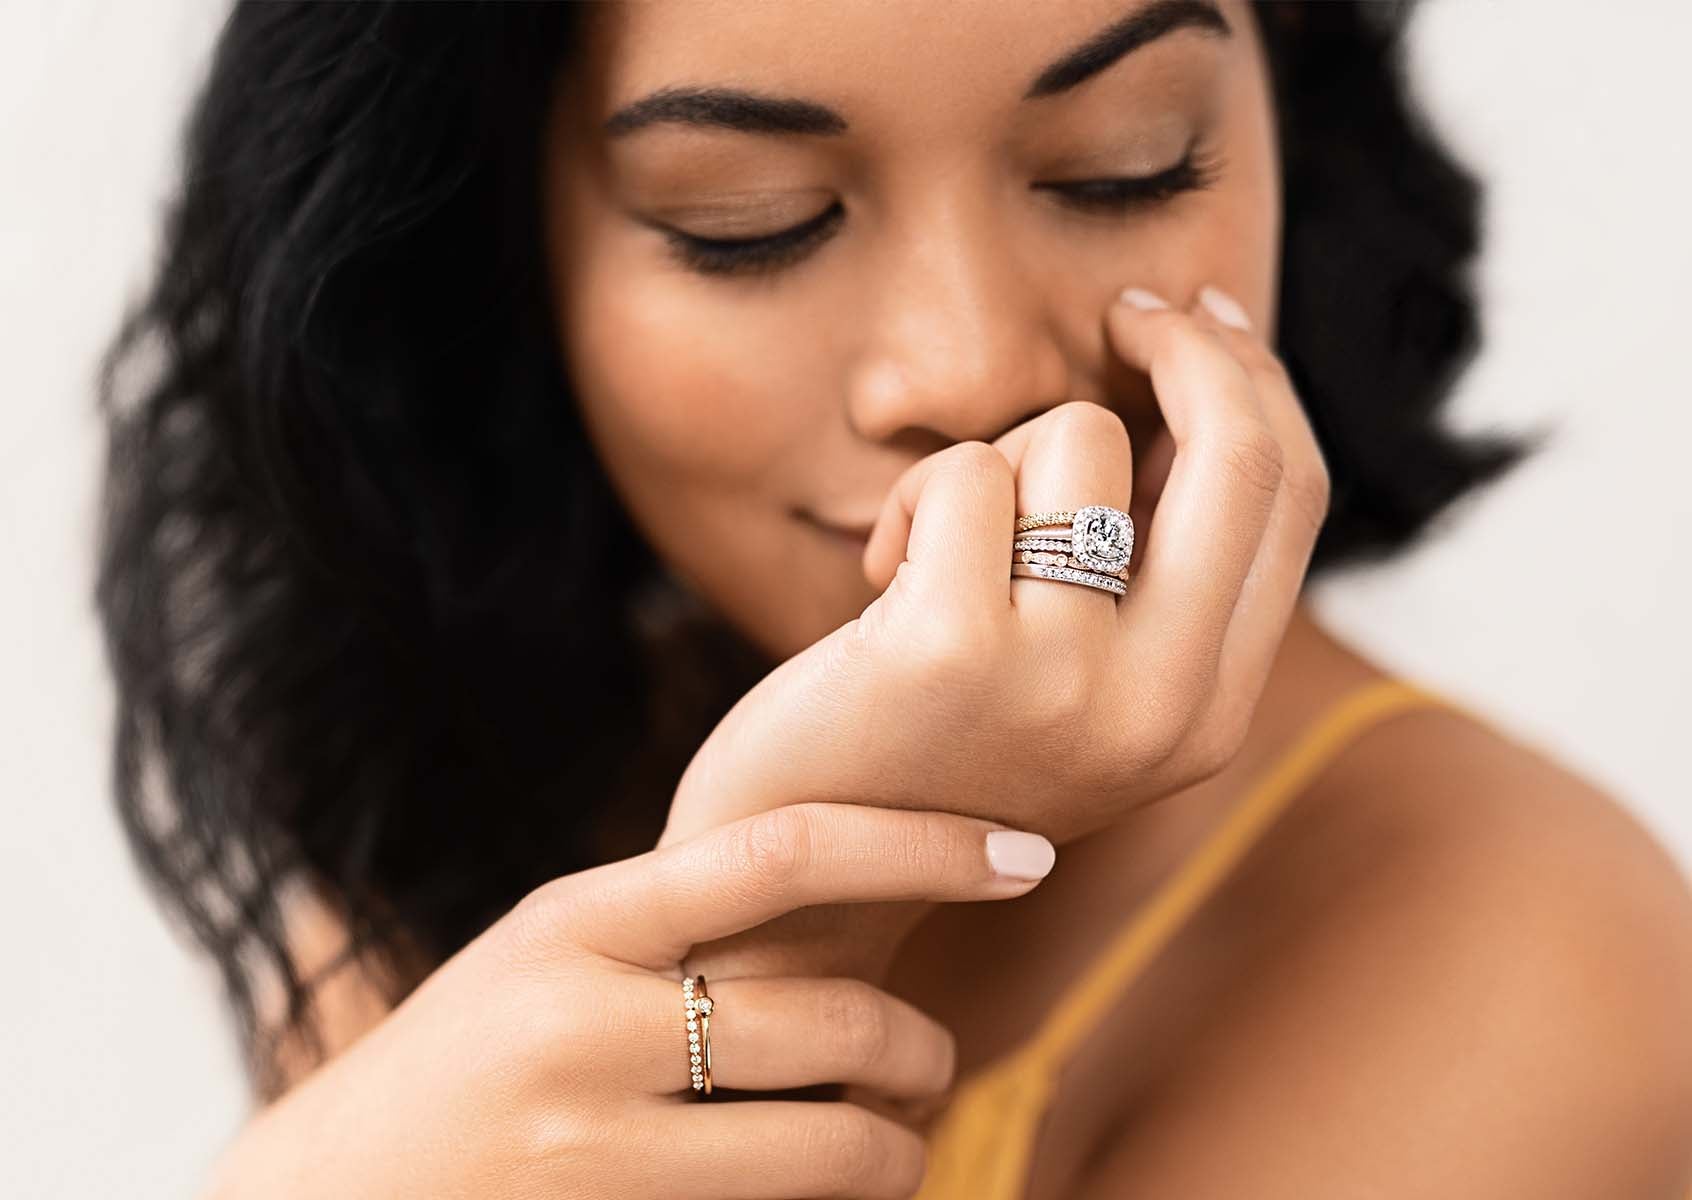 A model smiles softly while display a stack of MiaDonna fashion rings featuring white gold and conflict free, lab-created diamonds.